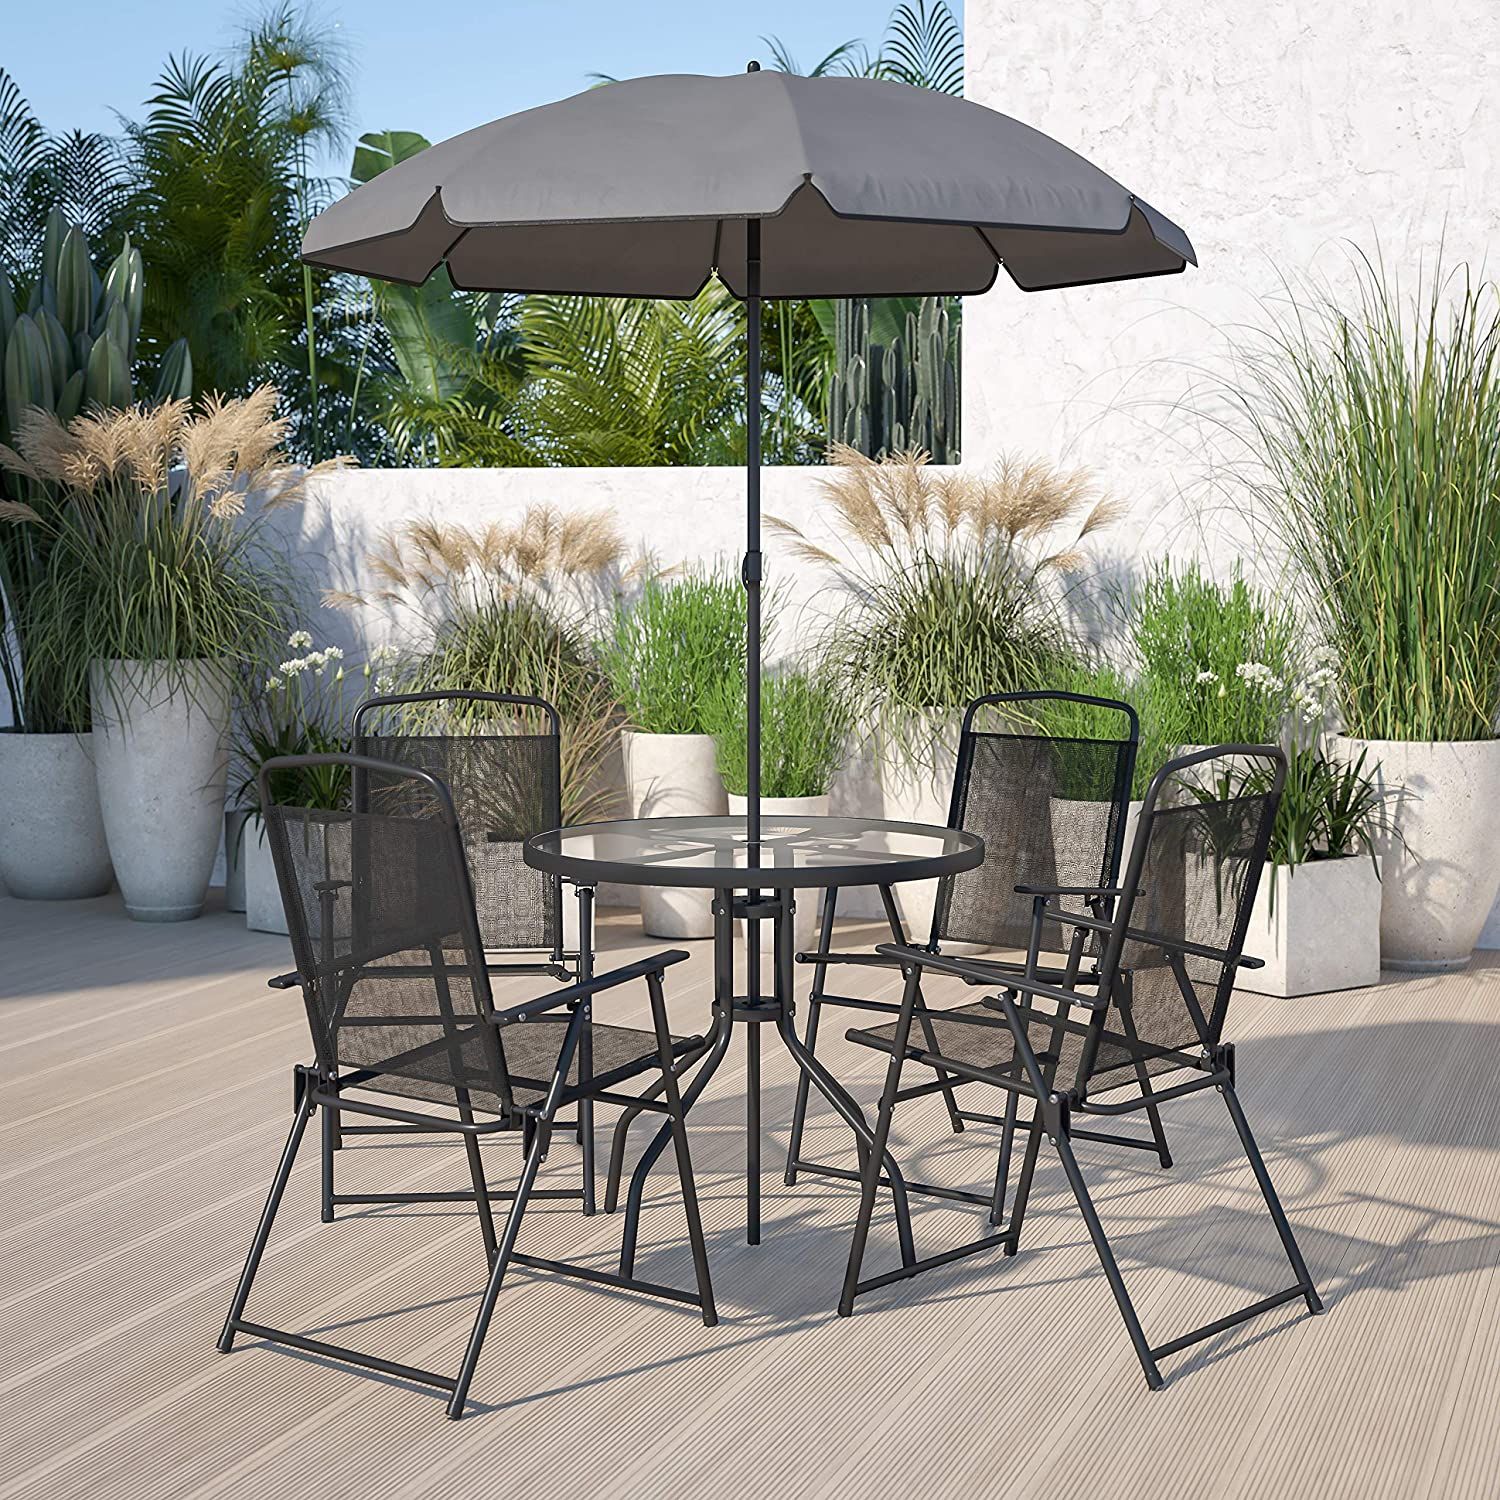 8 Best Patio Furniture Sets 2022 The, Best Budget Outdoor Dining Chairs Uk